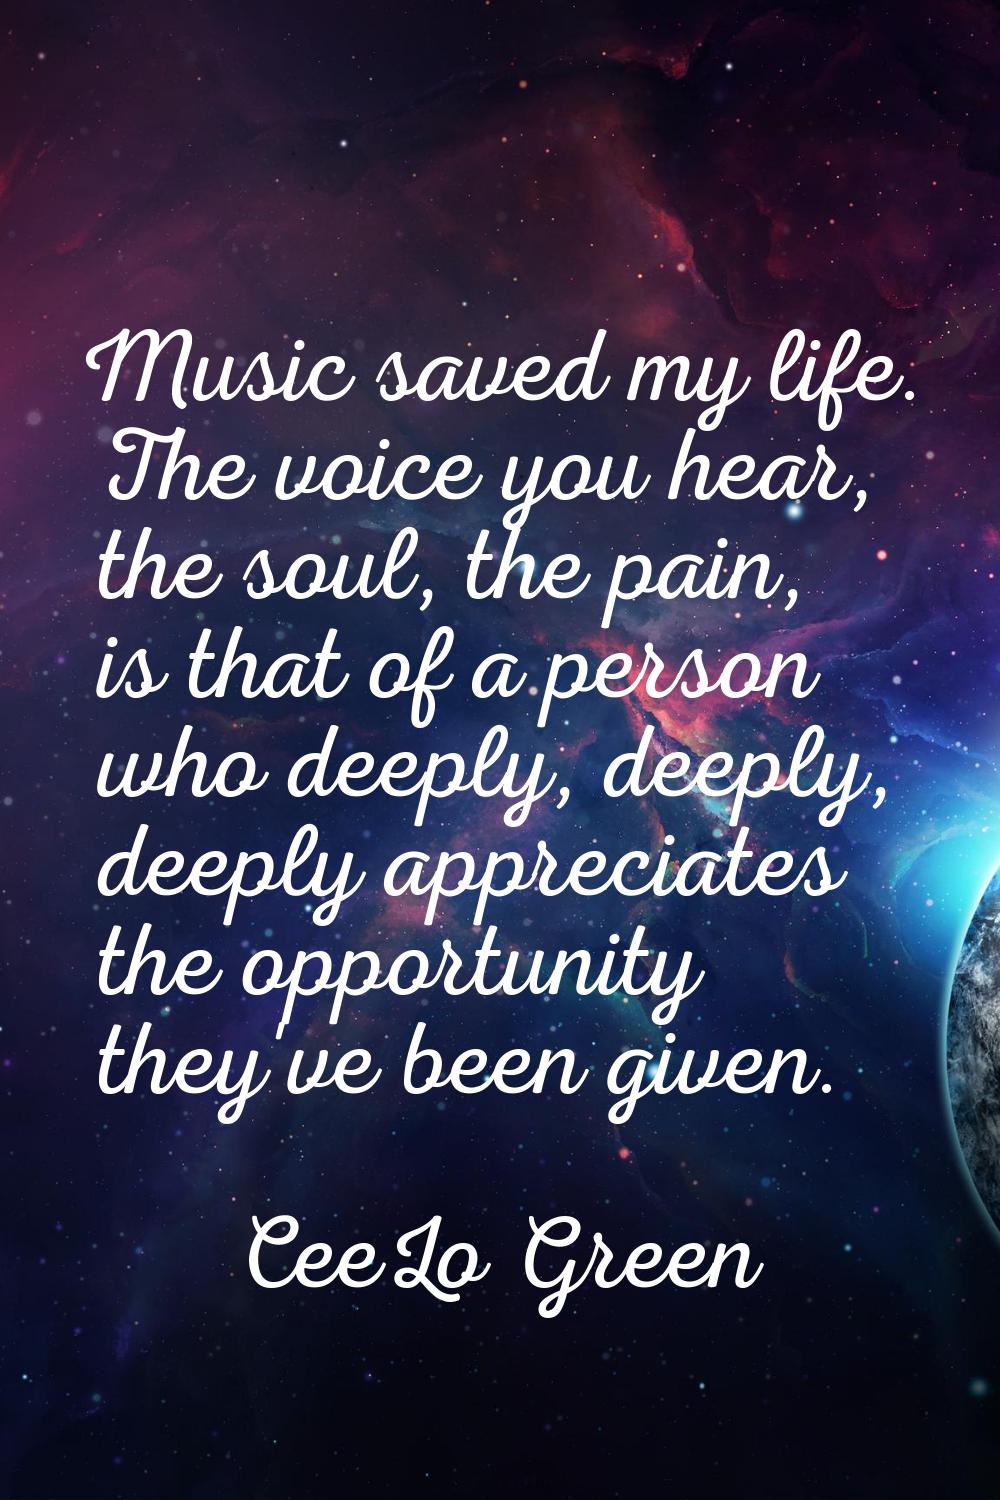 Music saved my life. The voice you hear, the soul, the pain, is that of a person who deeply, deeply